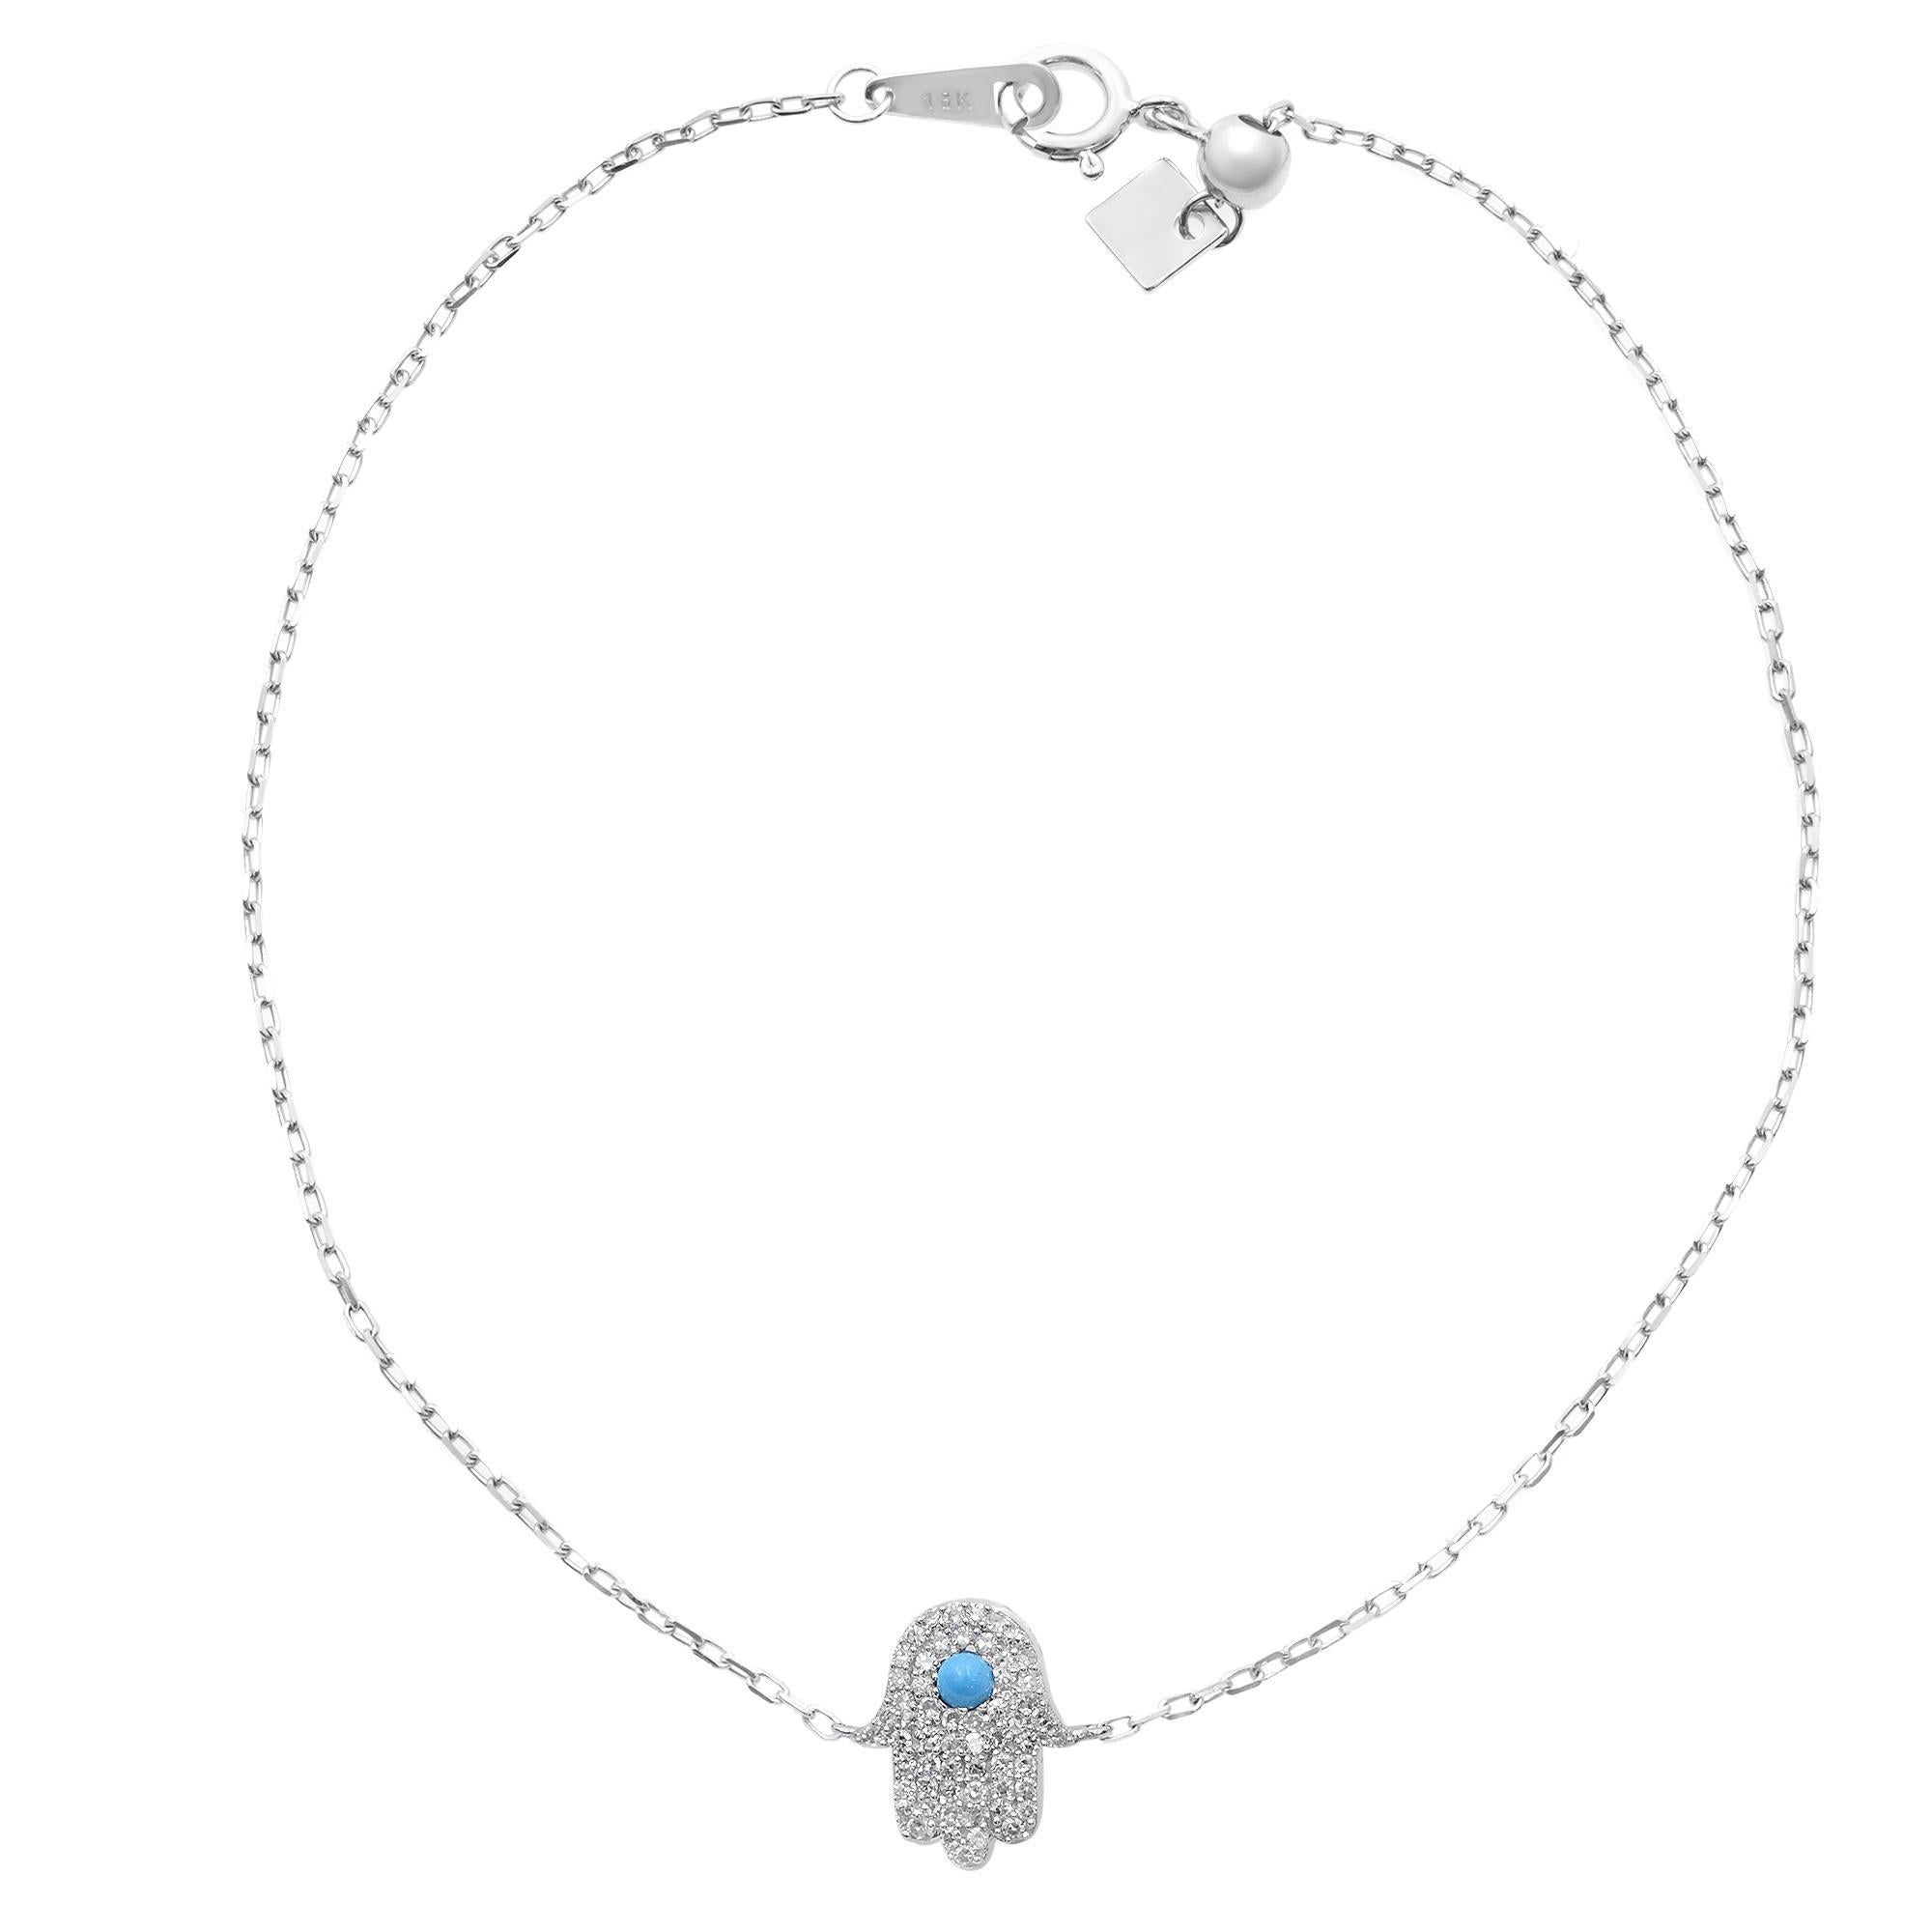 Classic and timeless hamsa bracelet, crafted in 14k white gold comes with center stone turquoise surrounded by round cut pave set white diamonds weighing 0.15cttw, anchored with delicate 7.5 inches 14k white gold chain. This bracelet is available in